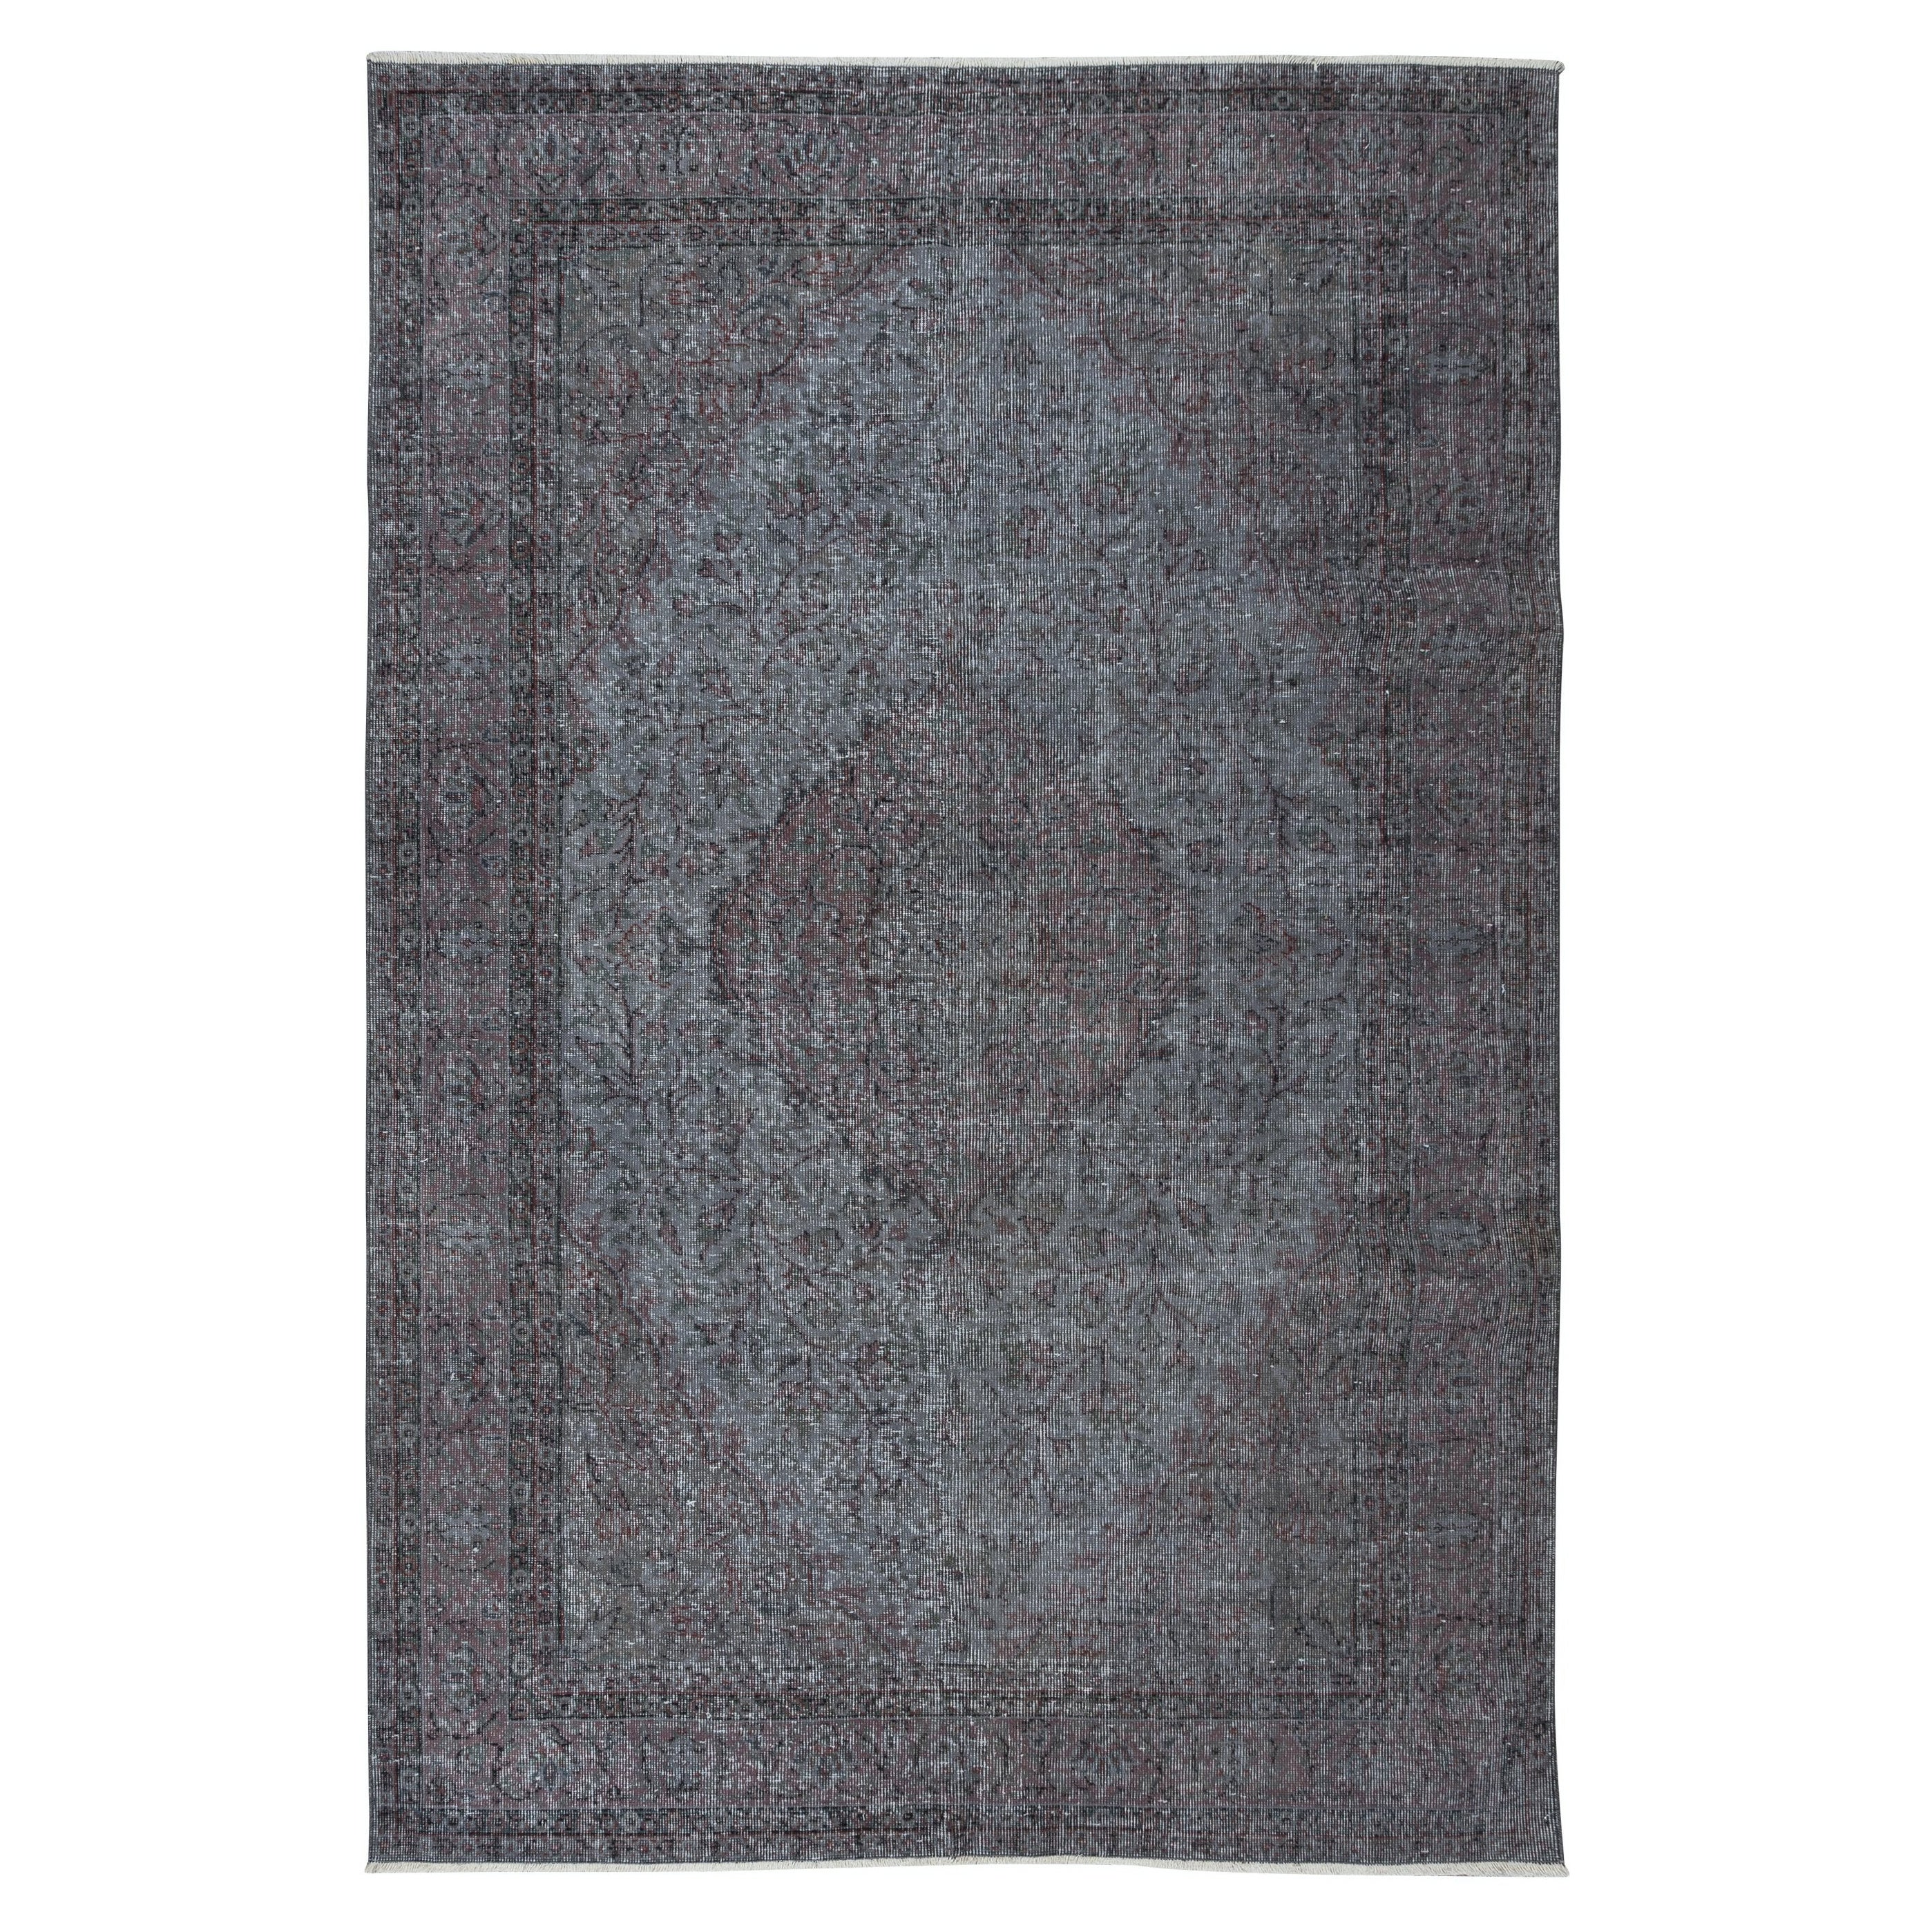 6x9.2 Ft Modern Handmade Area Rug in Gray & Soft Red, Turkish Low Pile Carpet For Sale